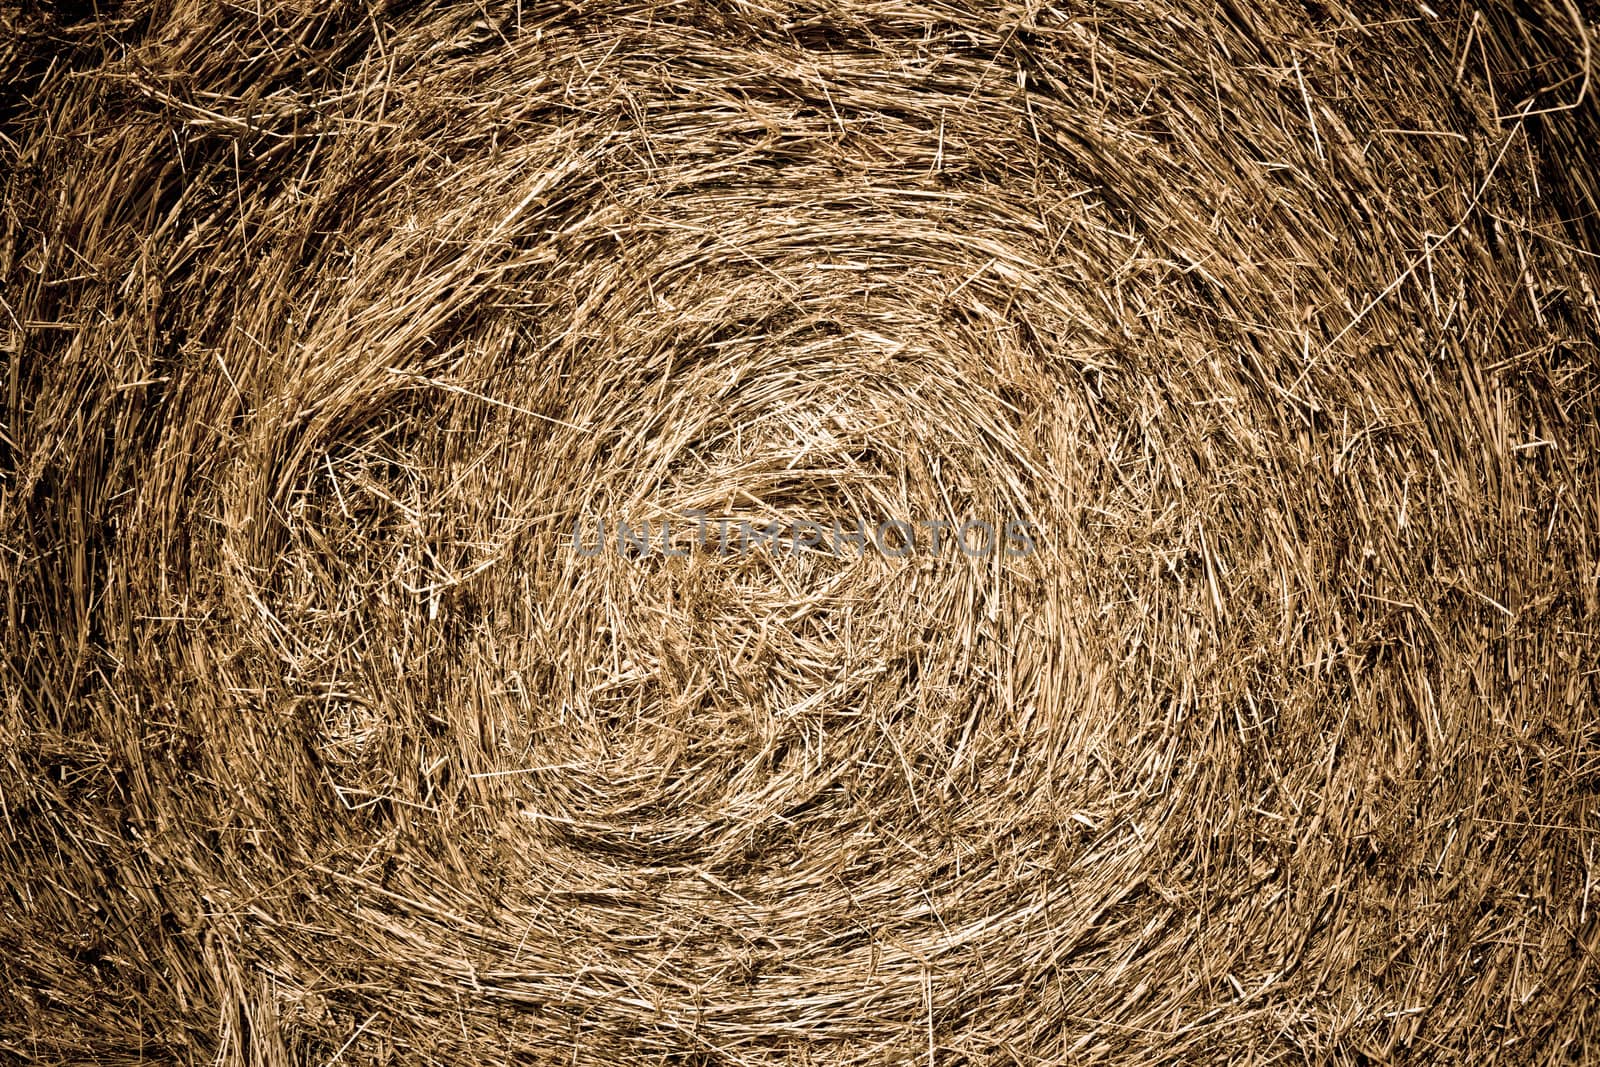 Closeup detail of the texture of a circular hay bale made of baled dried grass for use as silage and winter feed for livestock